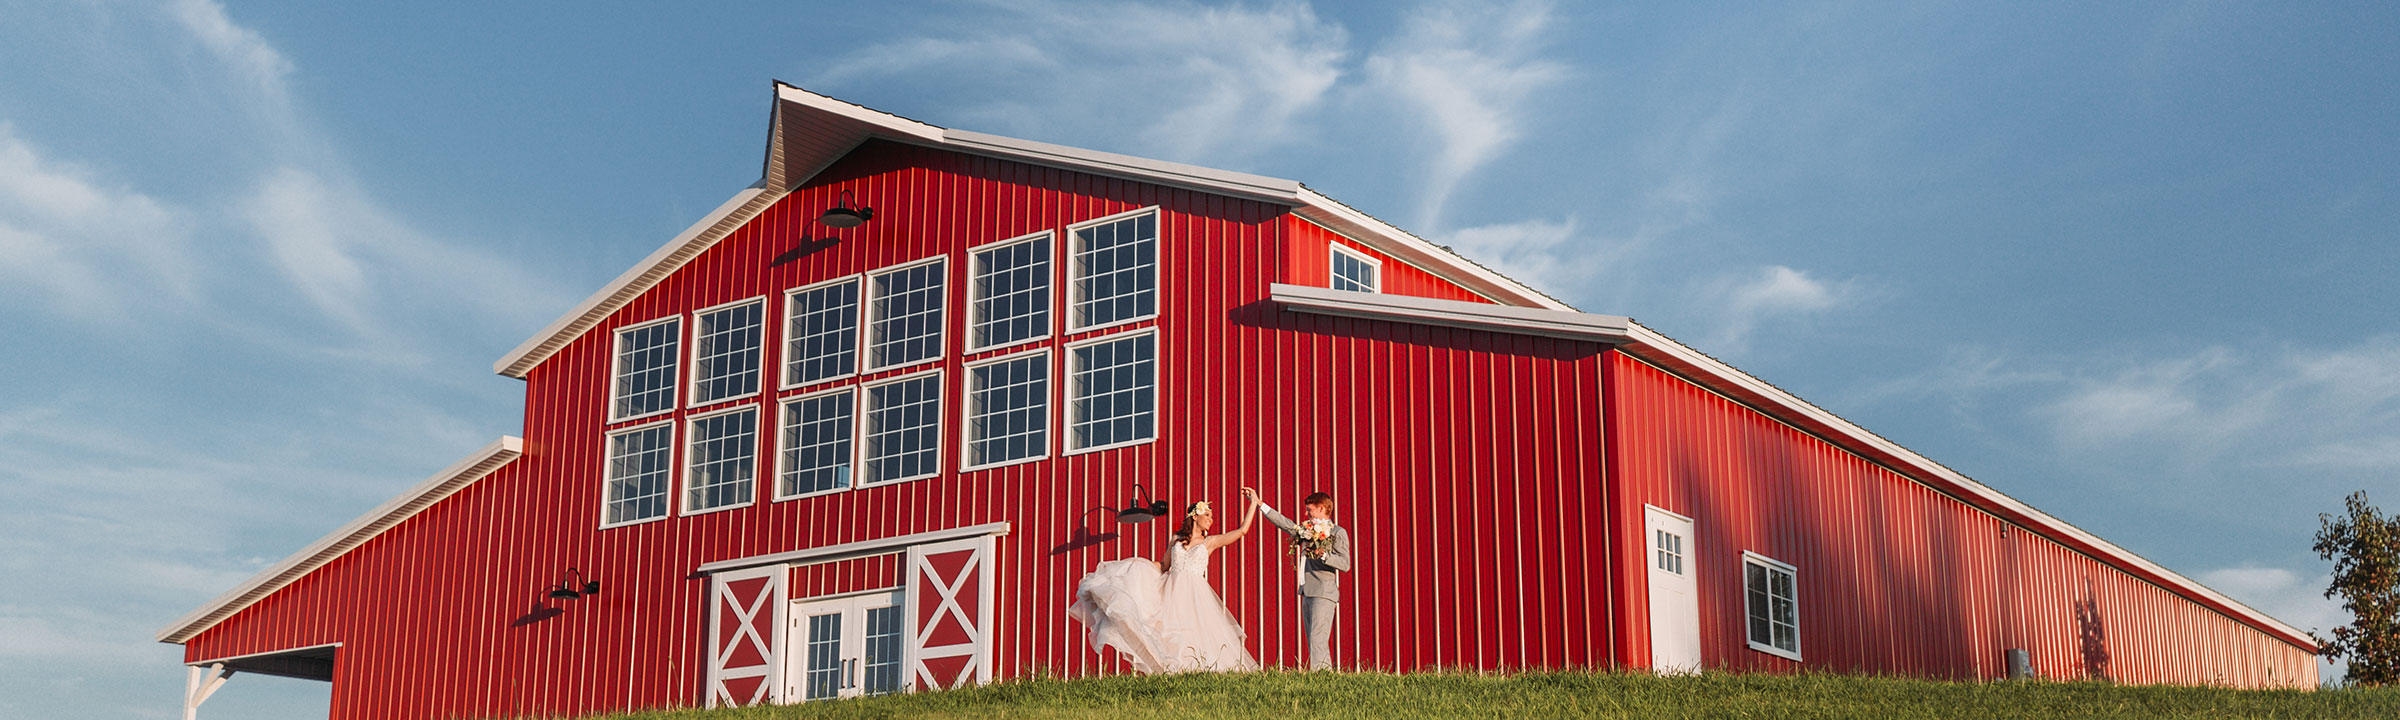 Bride and groom dancing at the back of the barn